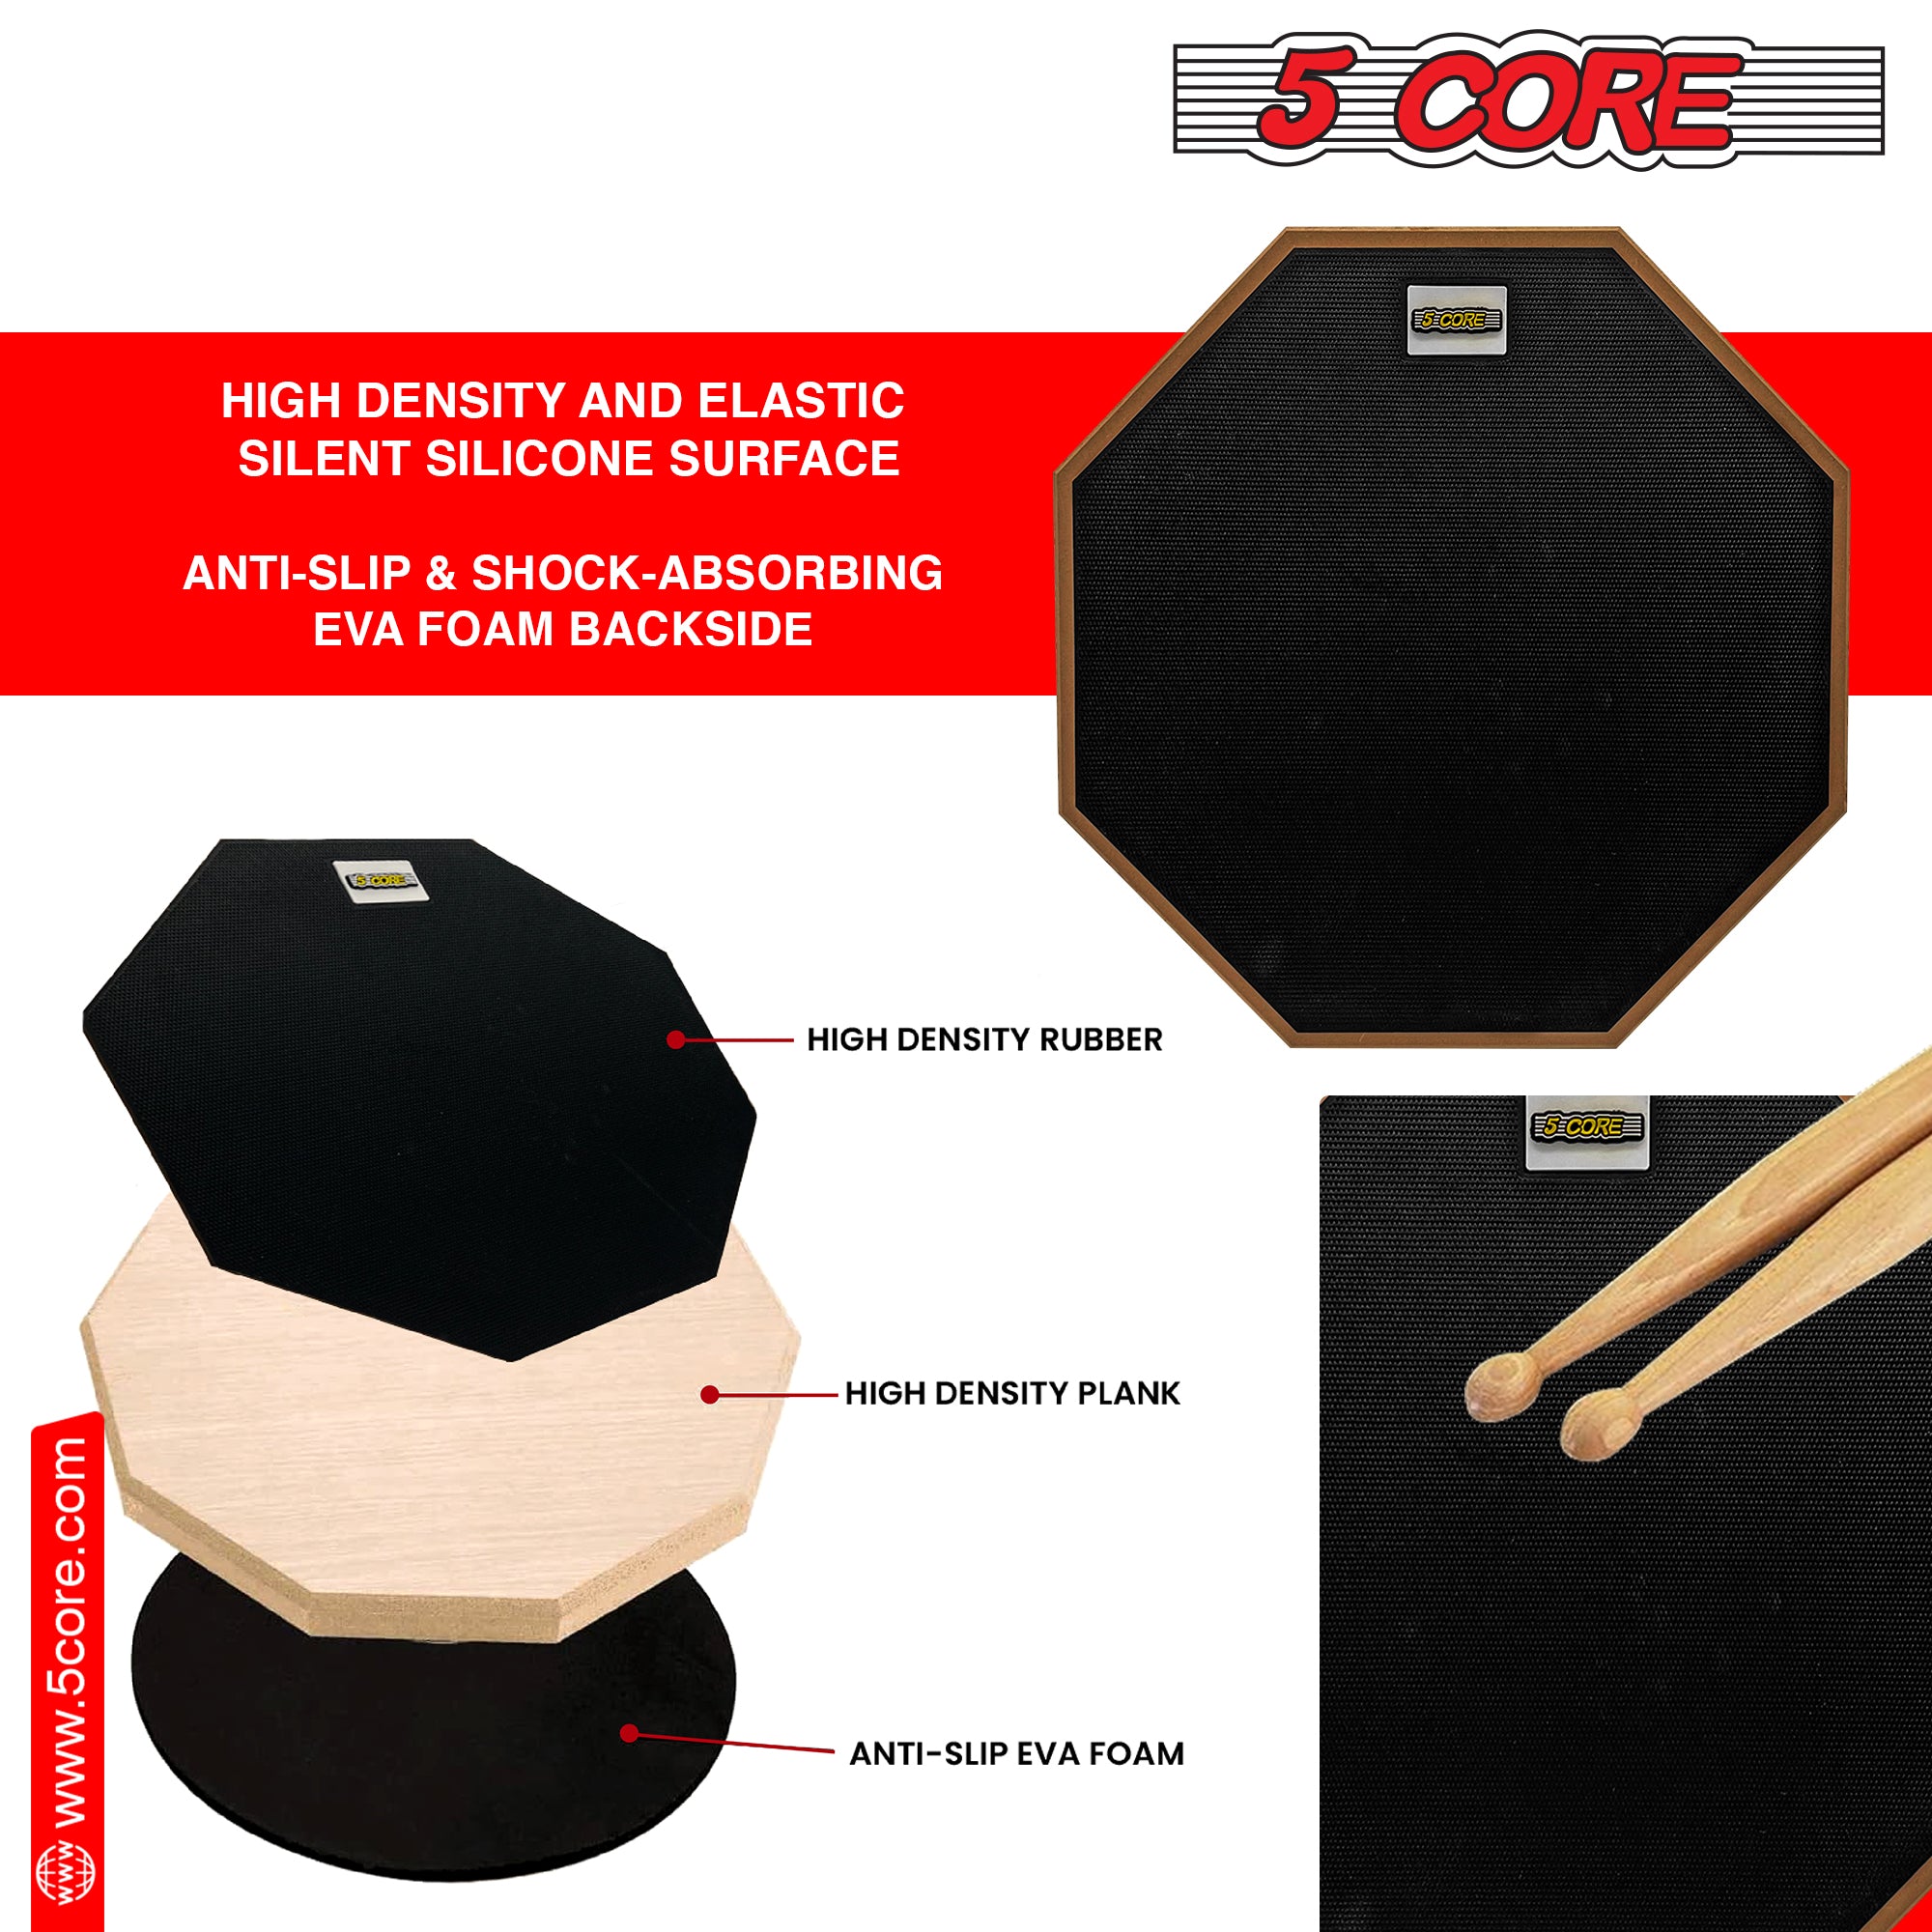 5 Core Drum Practice Pad Set • 12" Adjustable Snare Drumming Stand • Double Sided Silent Drummer Kit